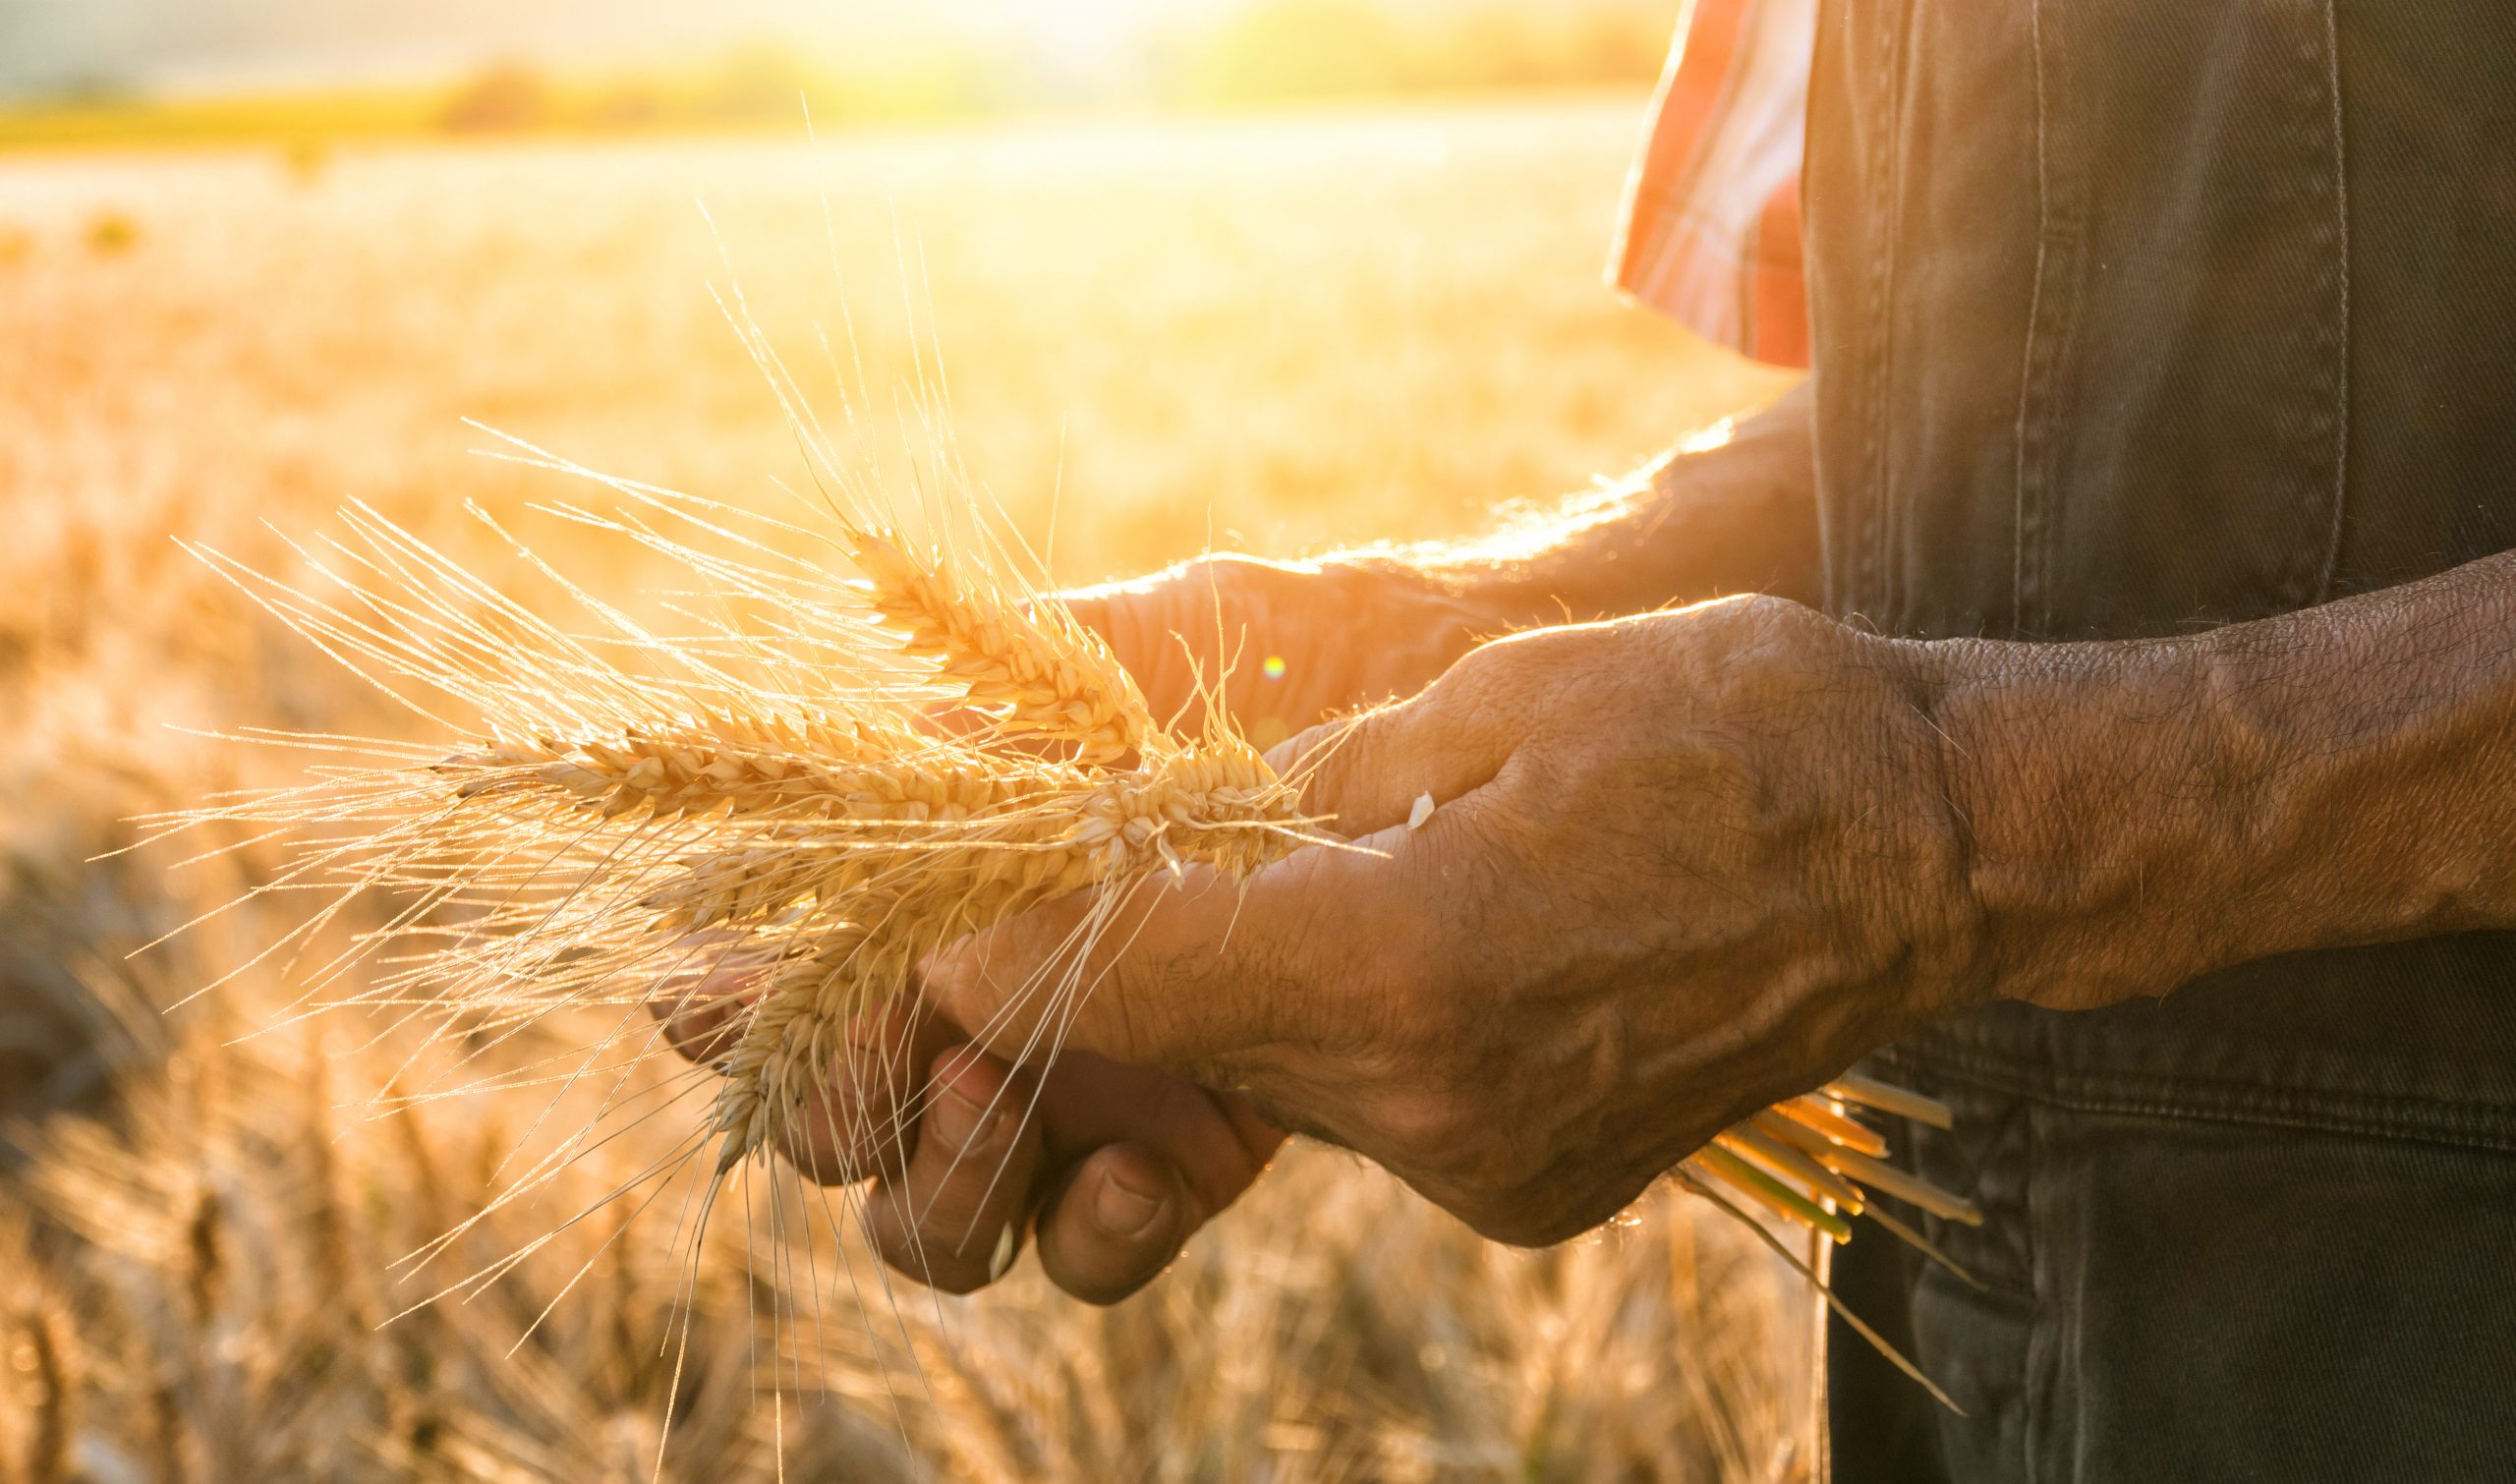 Farmer's hands holding wheat in field Manitoba